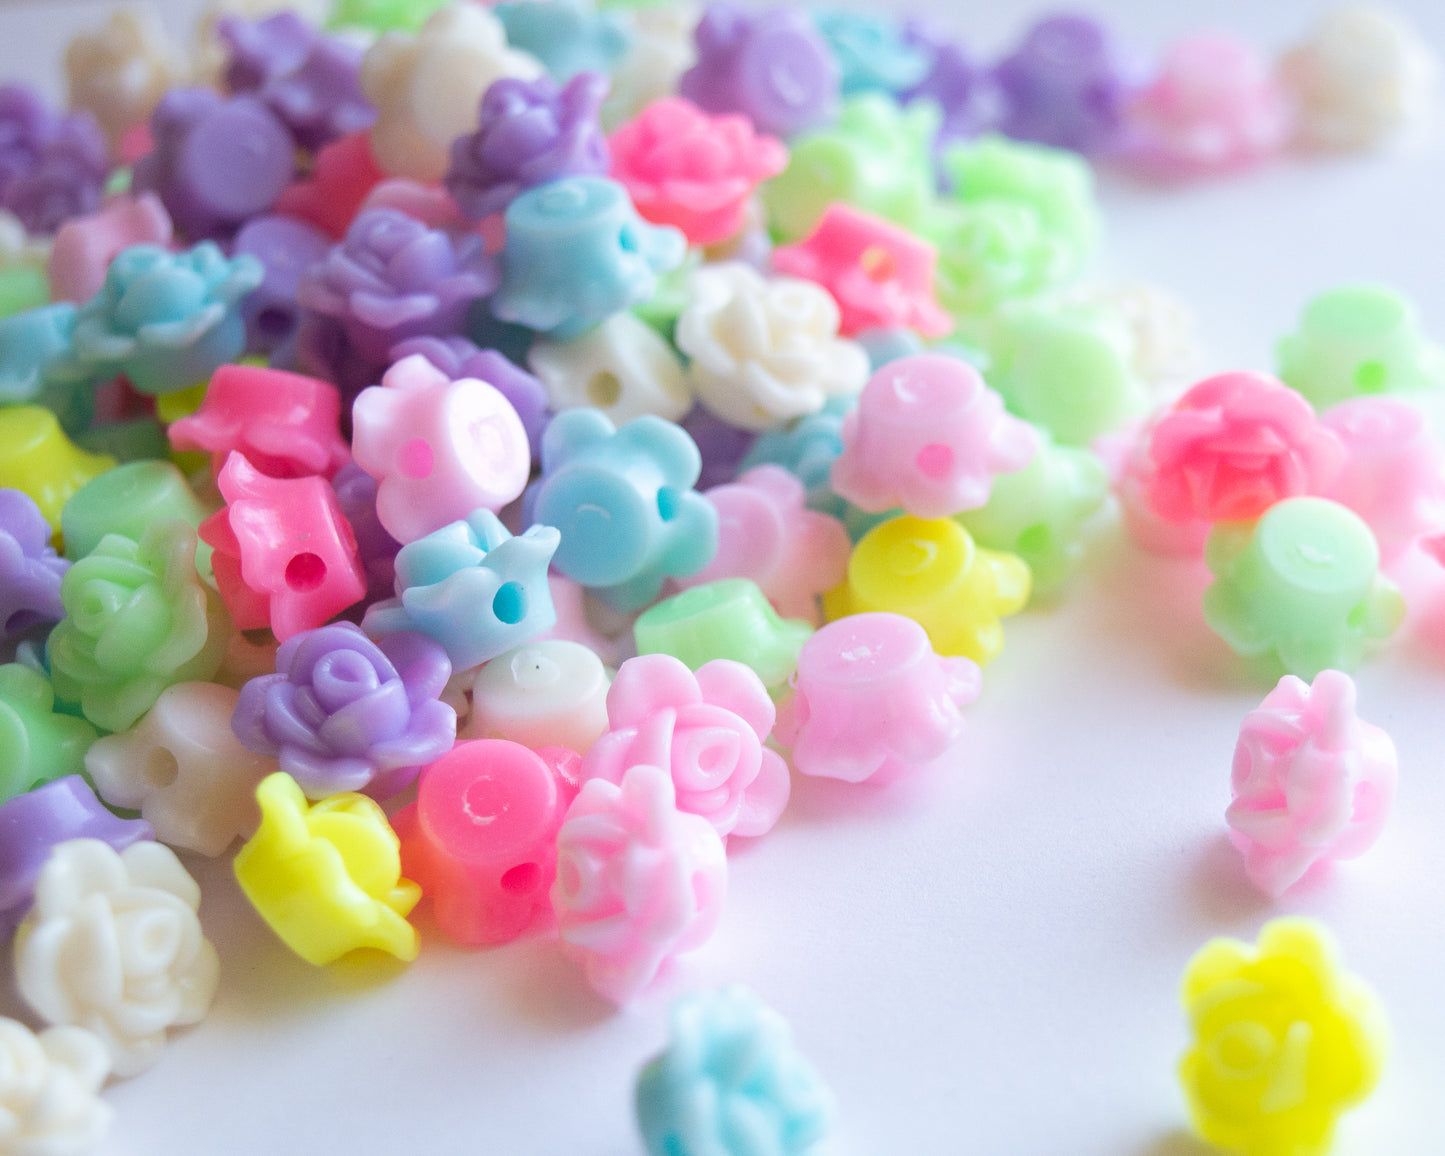 12.5mm x 8mm Rose Beads in Pastel Colored Acrylic